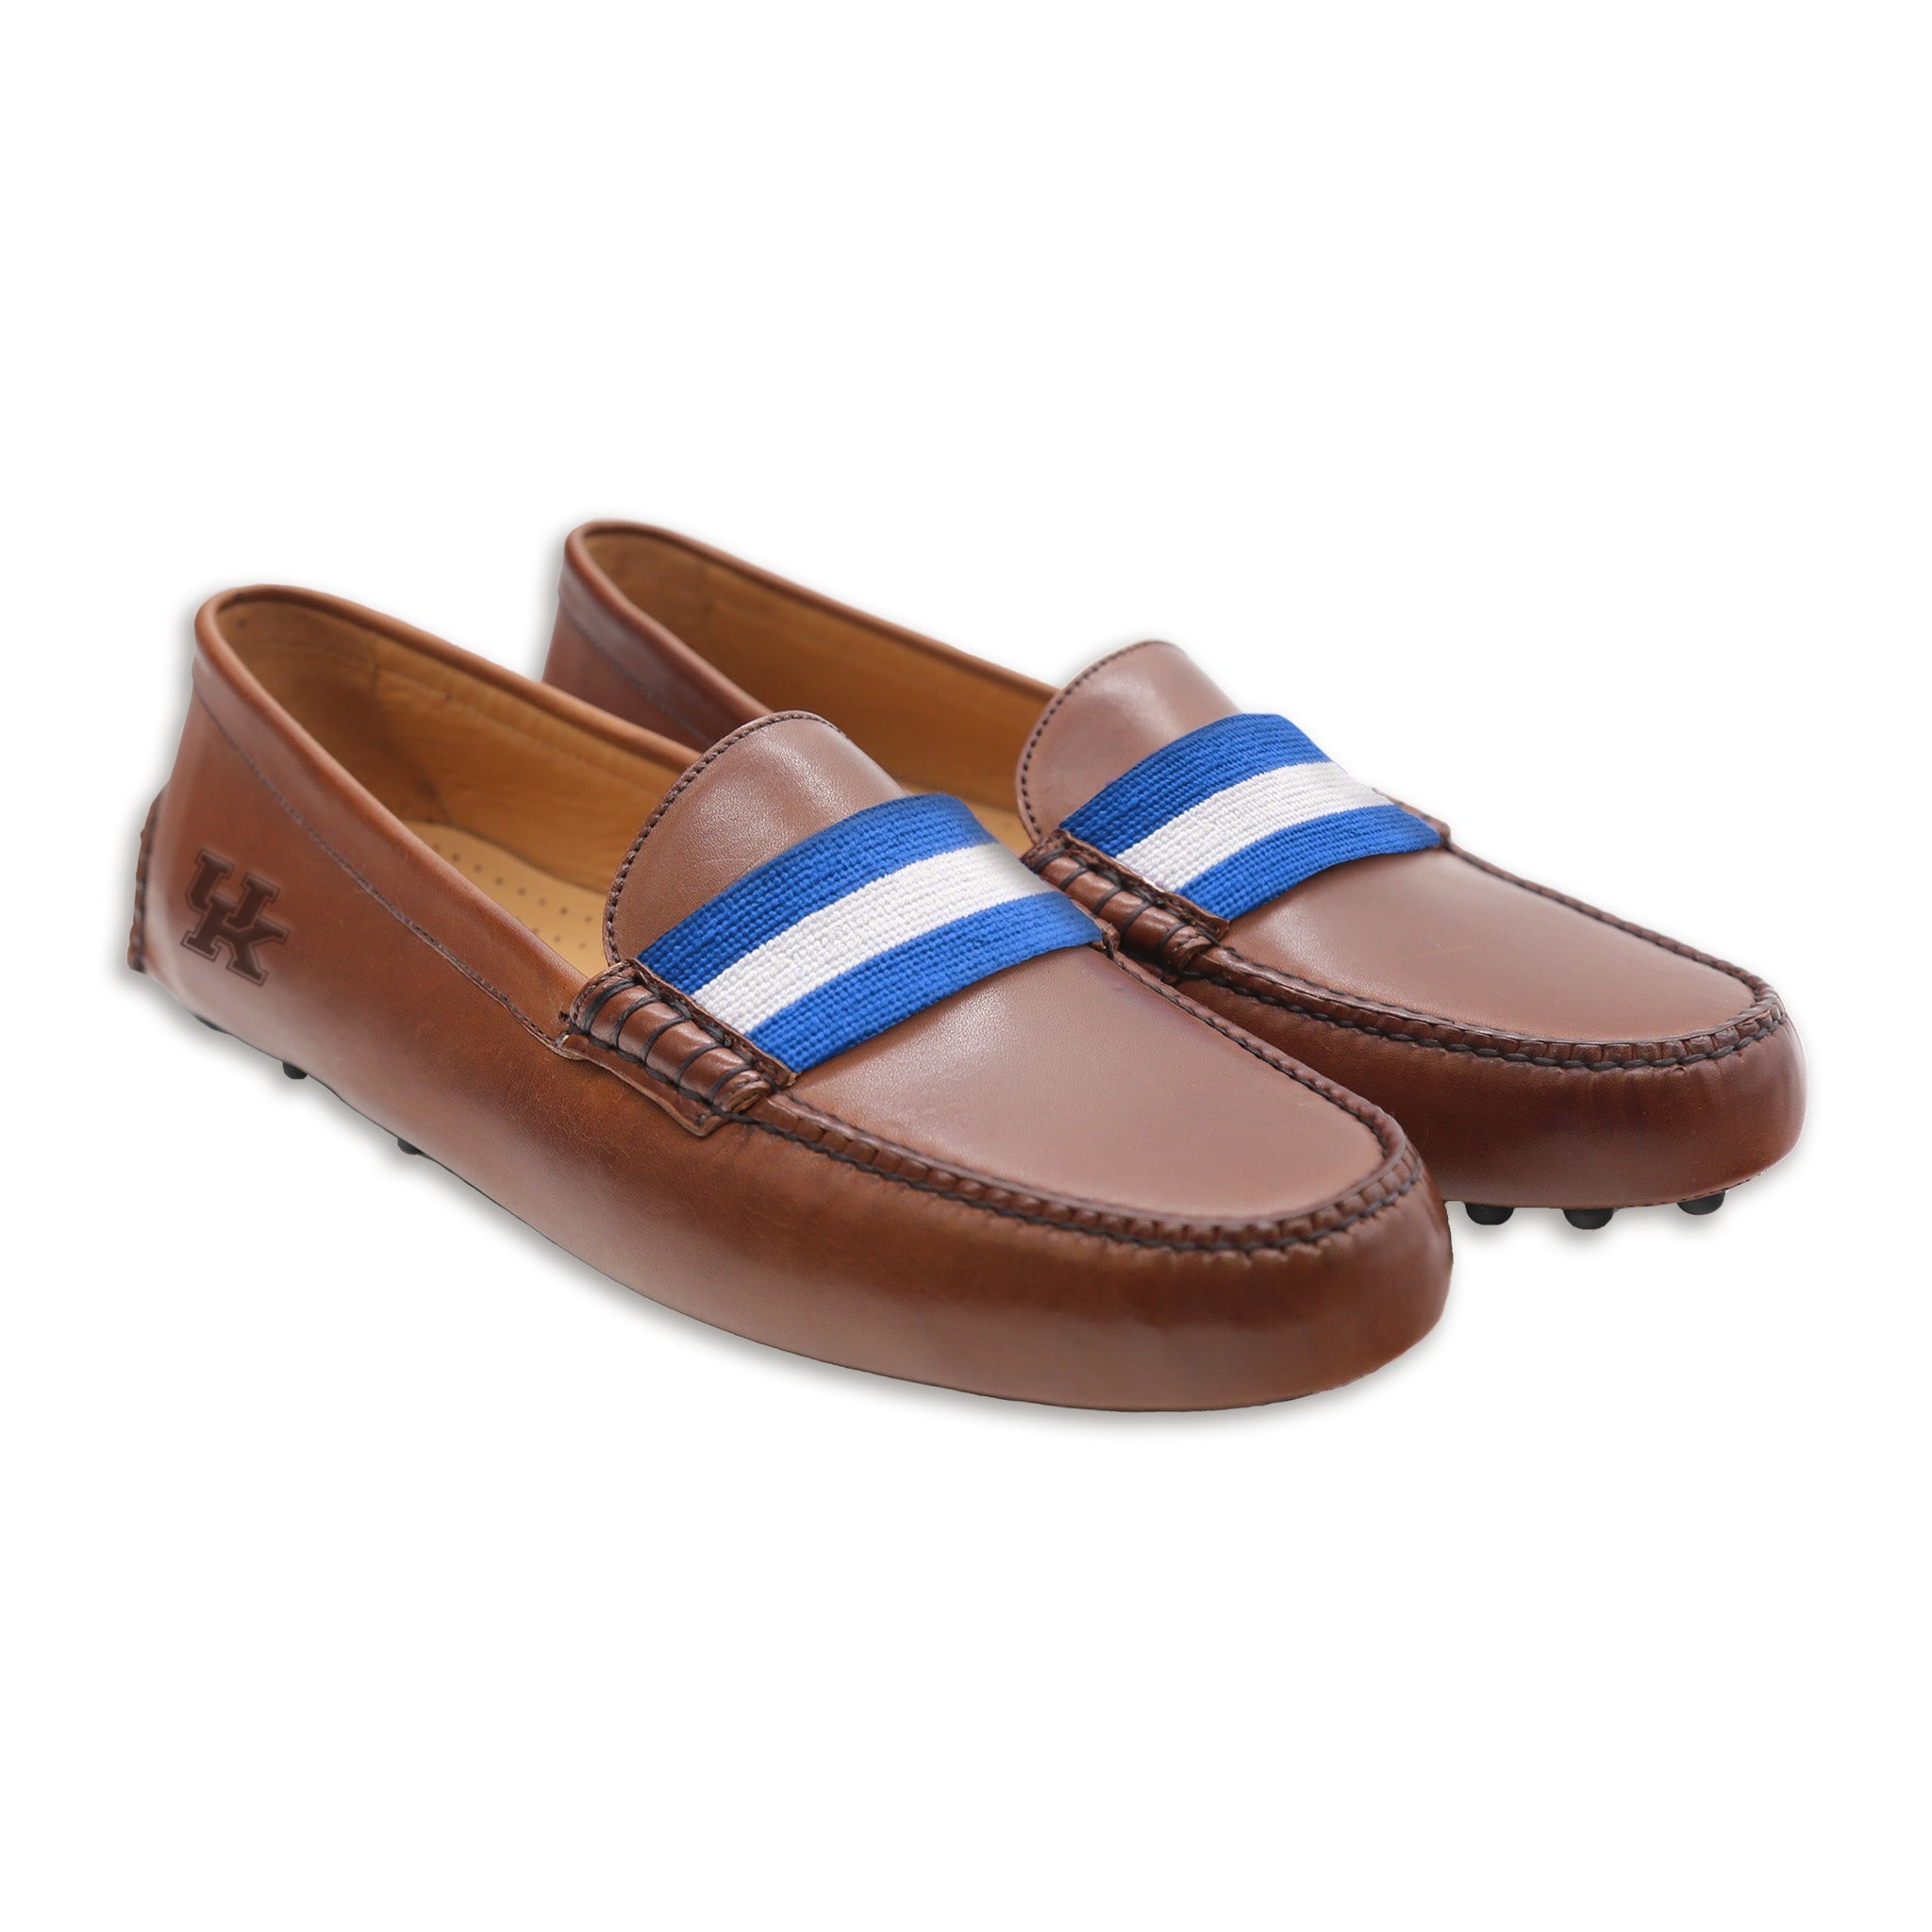 Leather-Logo) Smathers (Chestnut & – (Blue-White) Shoes Surcingle Branson Kentucky Driving